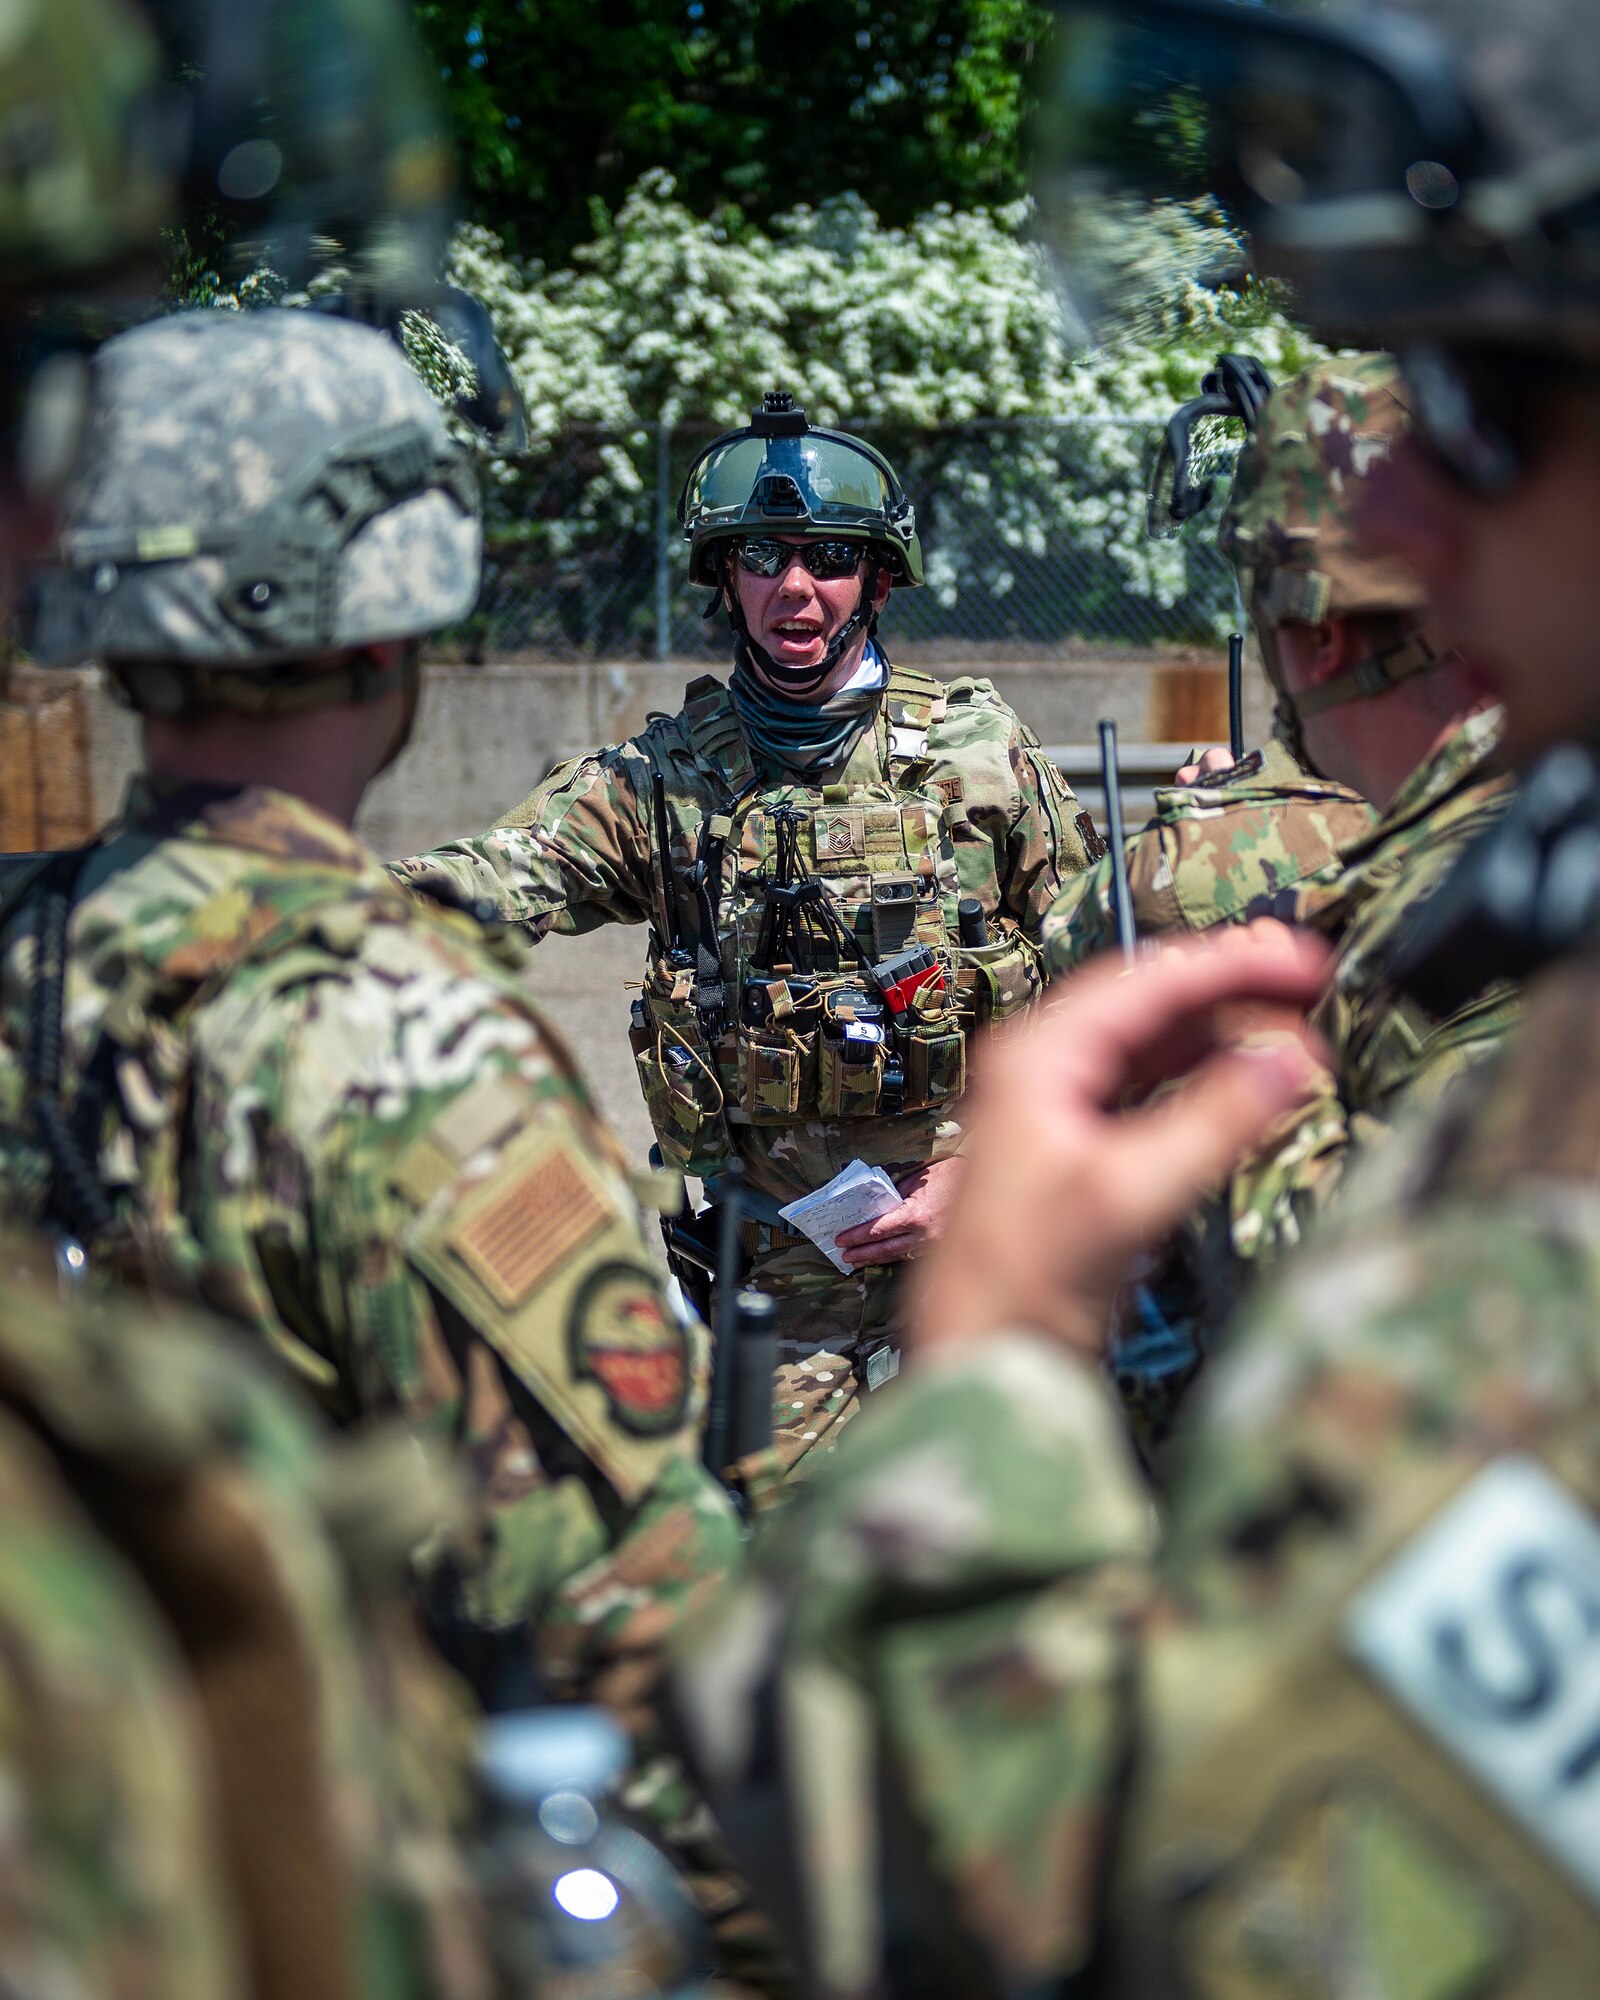 U.S. Air Force Airmen from the 133rd Airlift Wing Security Forces Squadron prepare to connect with local law enforcement to assist in their policing efforts in St. Paul, Minn., June 1, 2020.